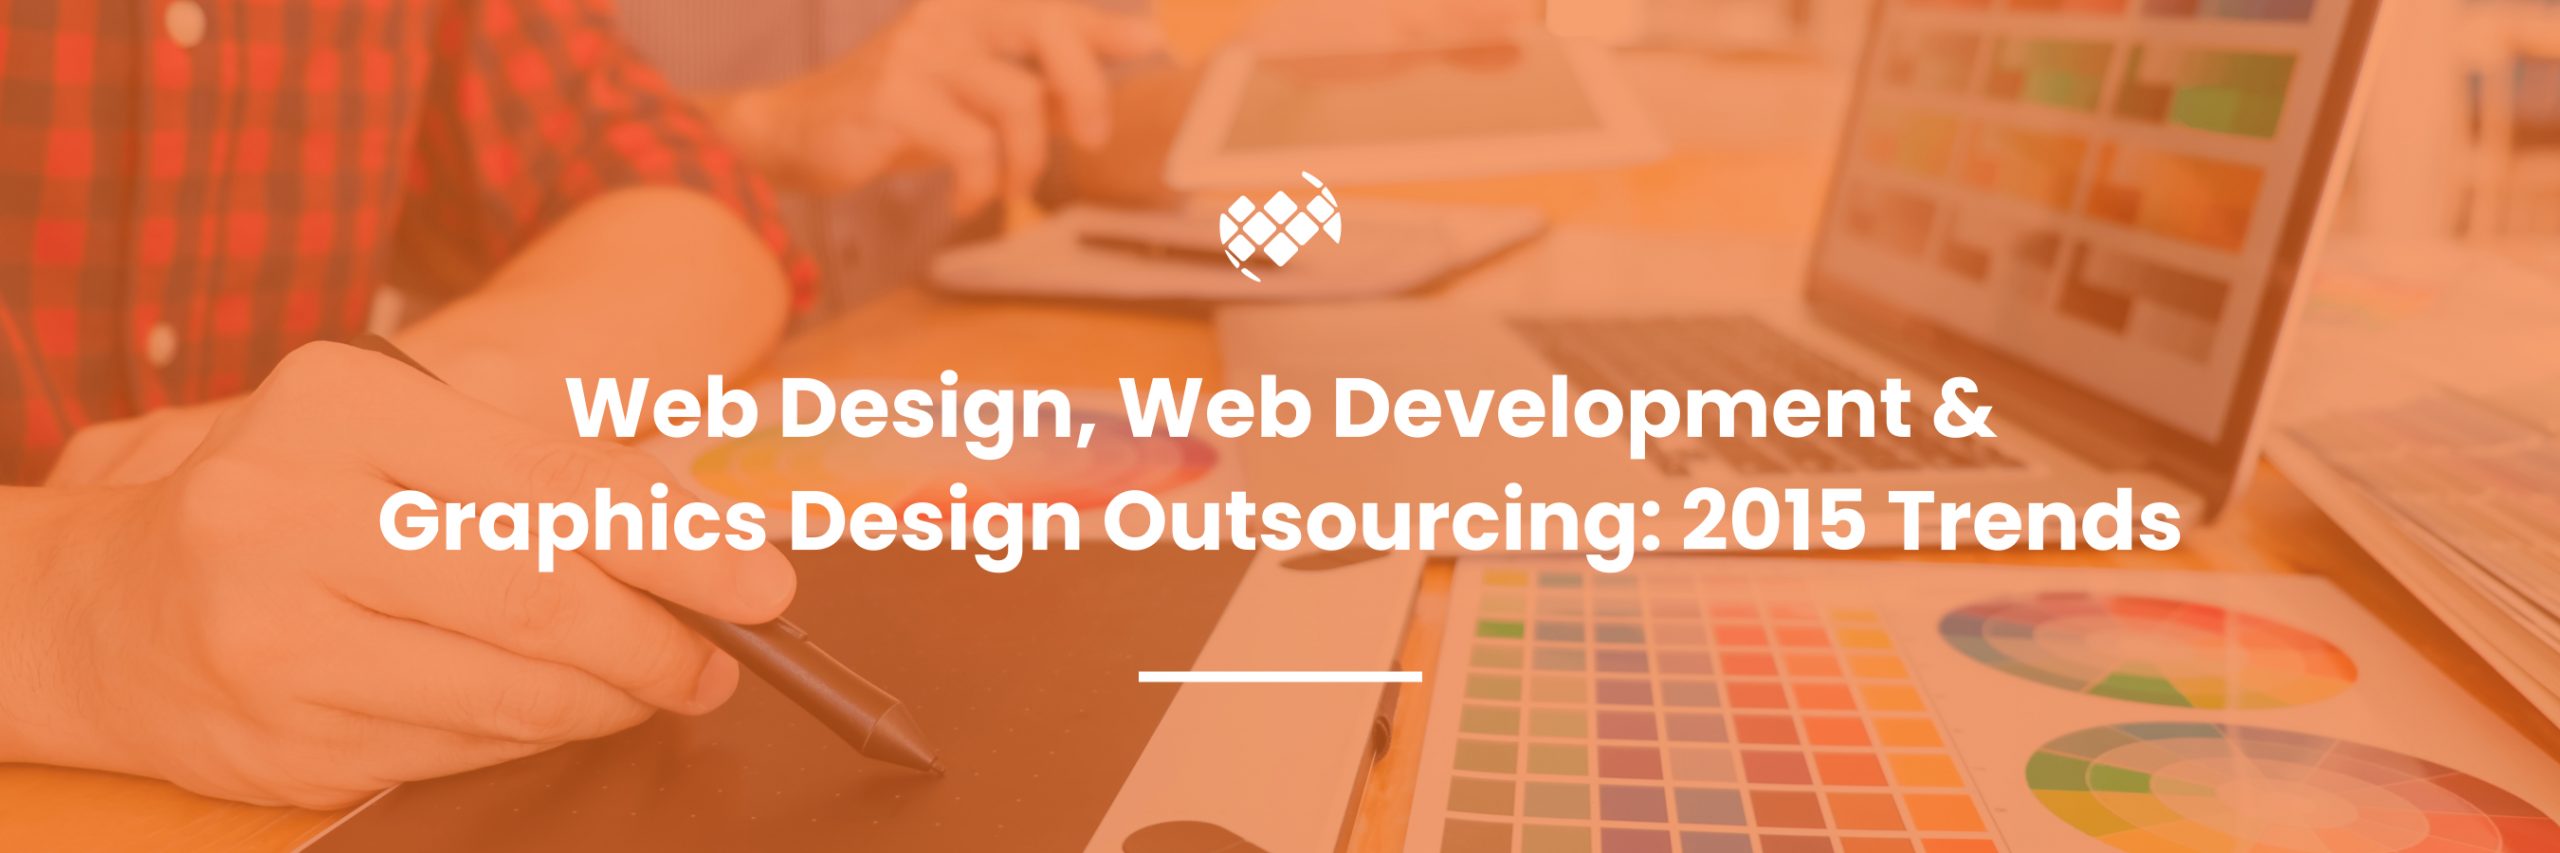 web design, web development and graphics design outsourcing trends